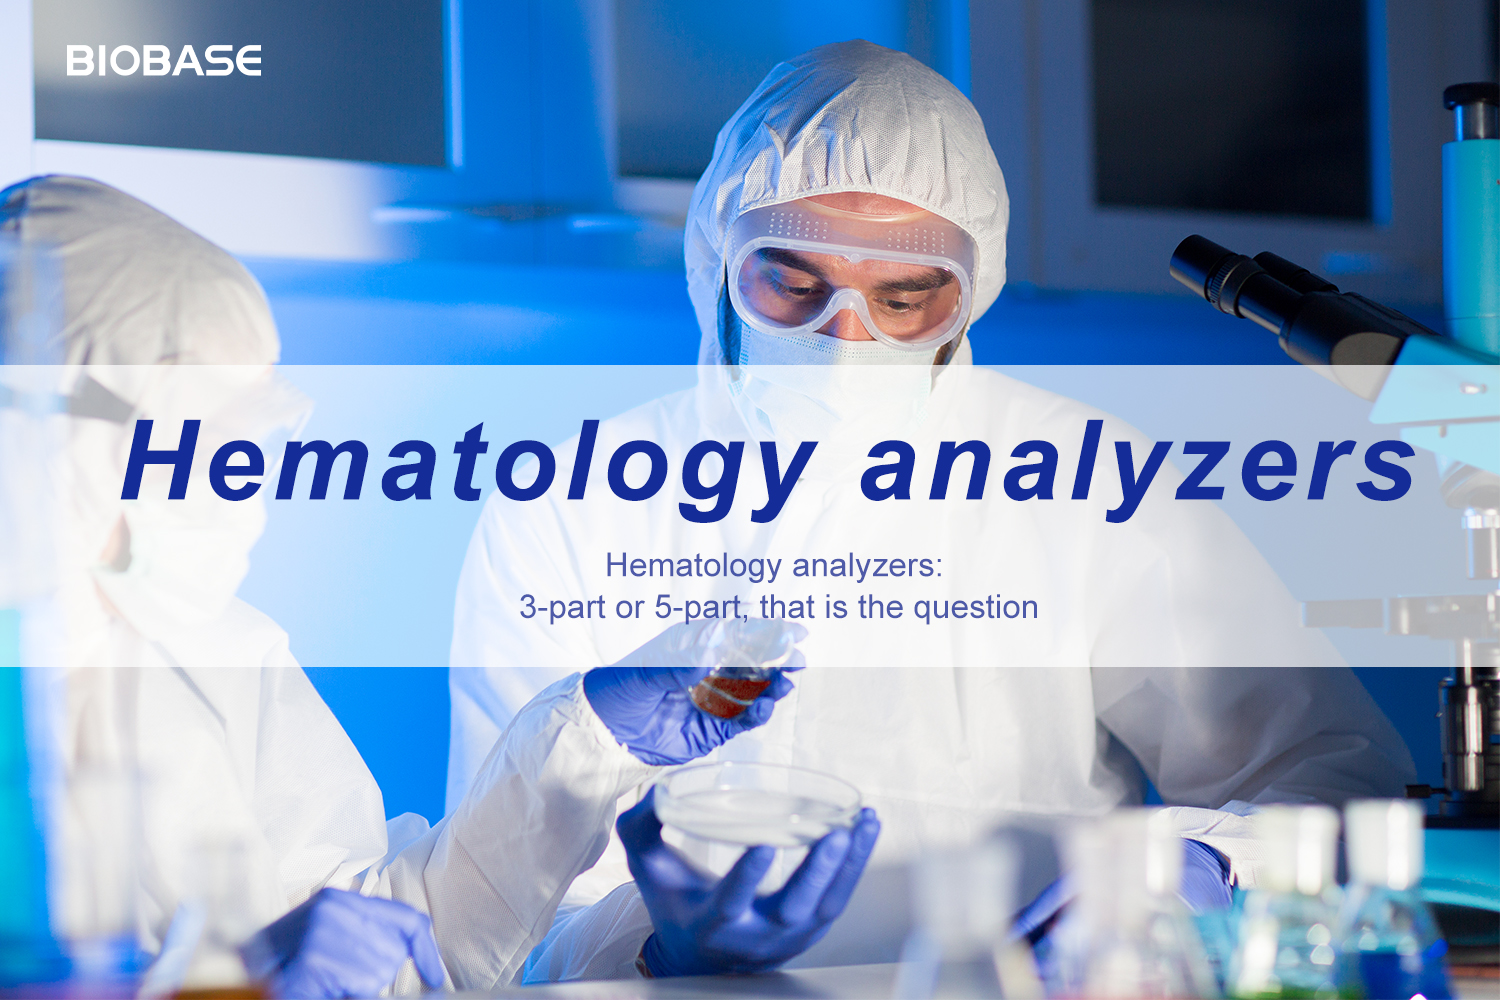 Hematology analyzers: 3-part or 5-part, that is the question